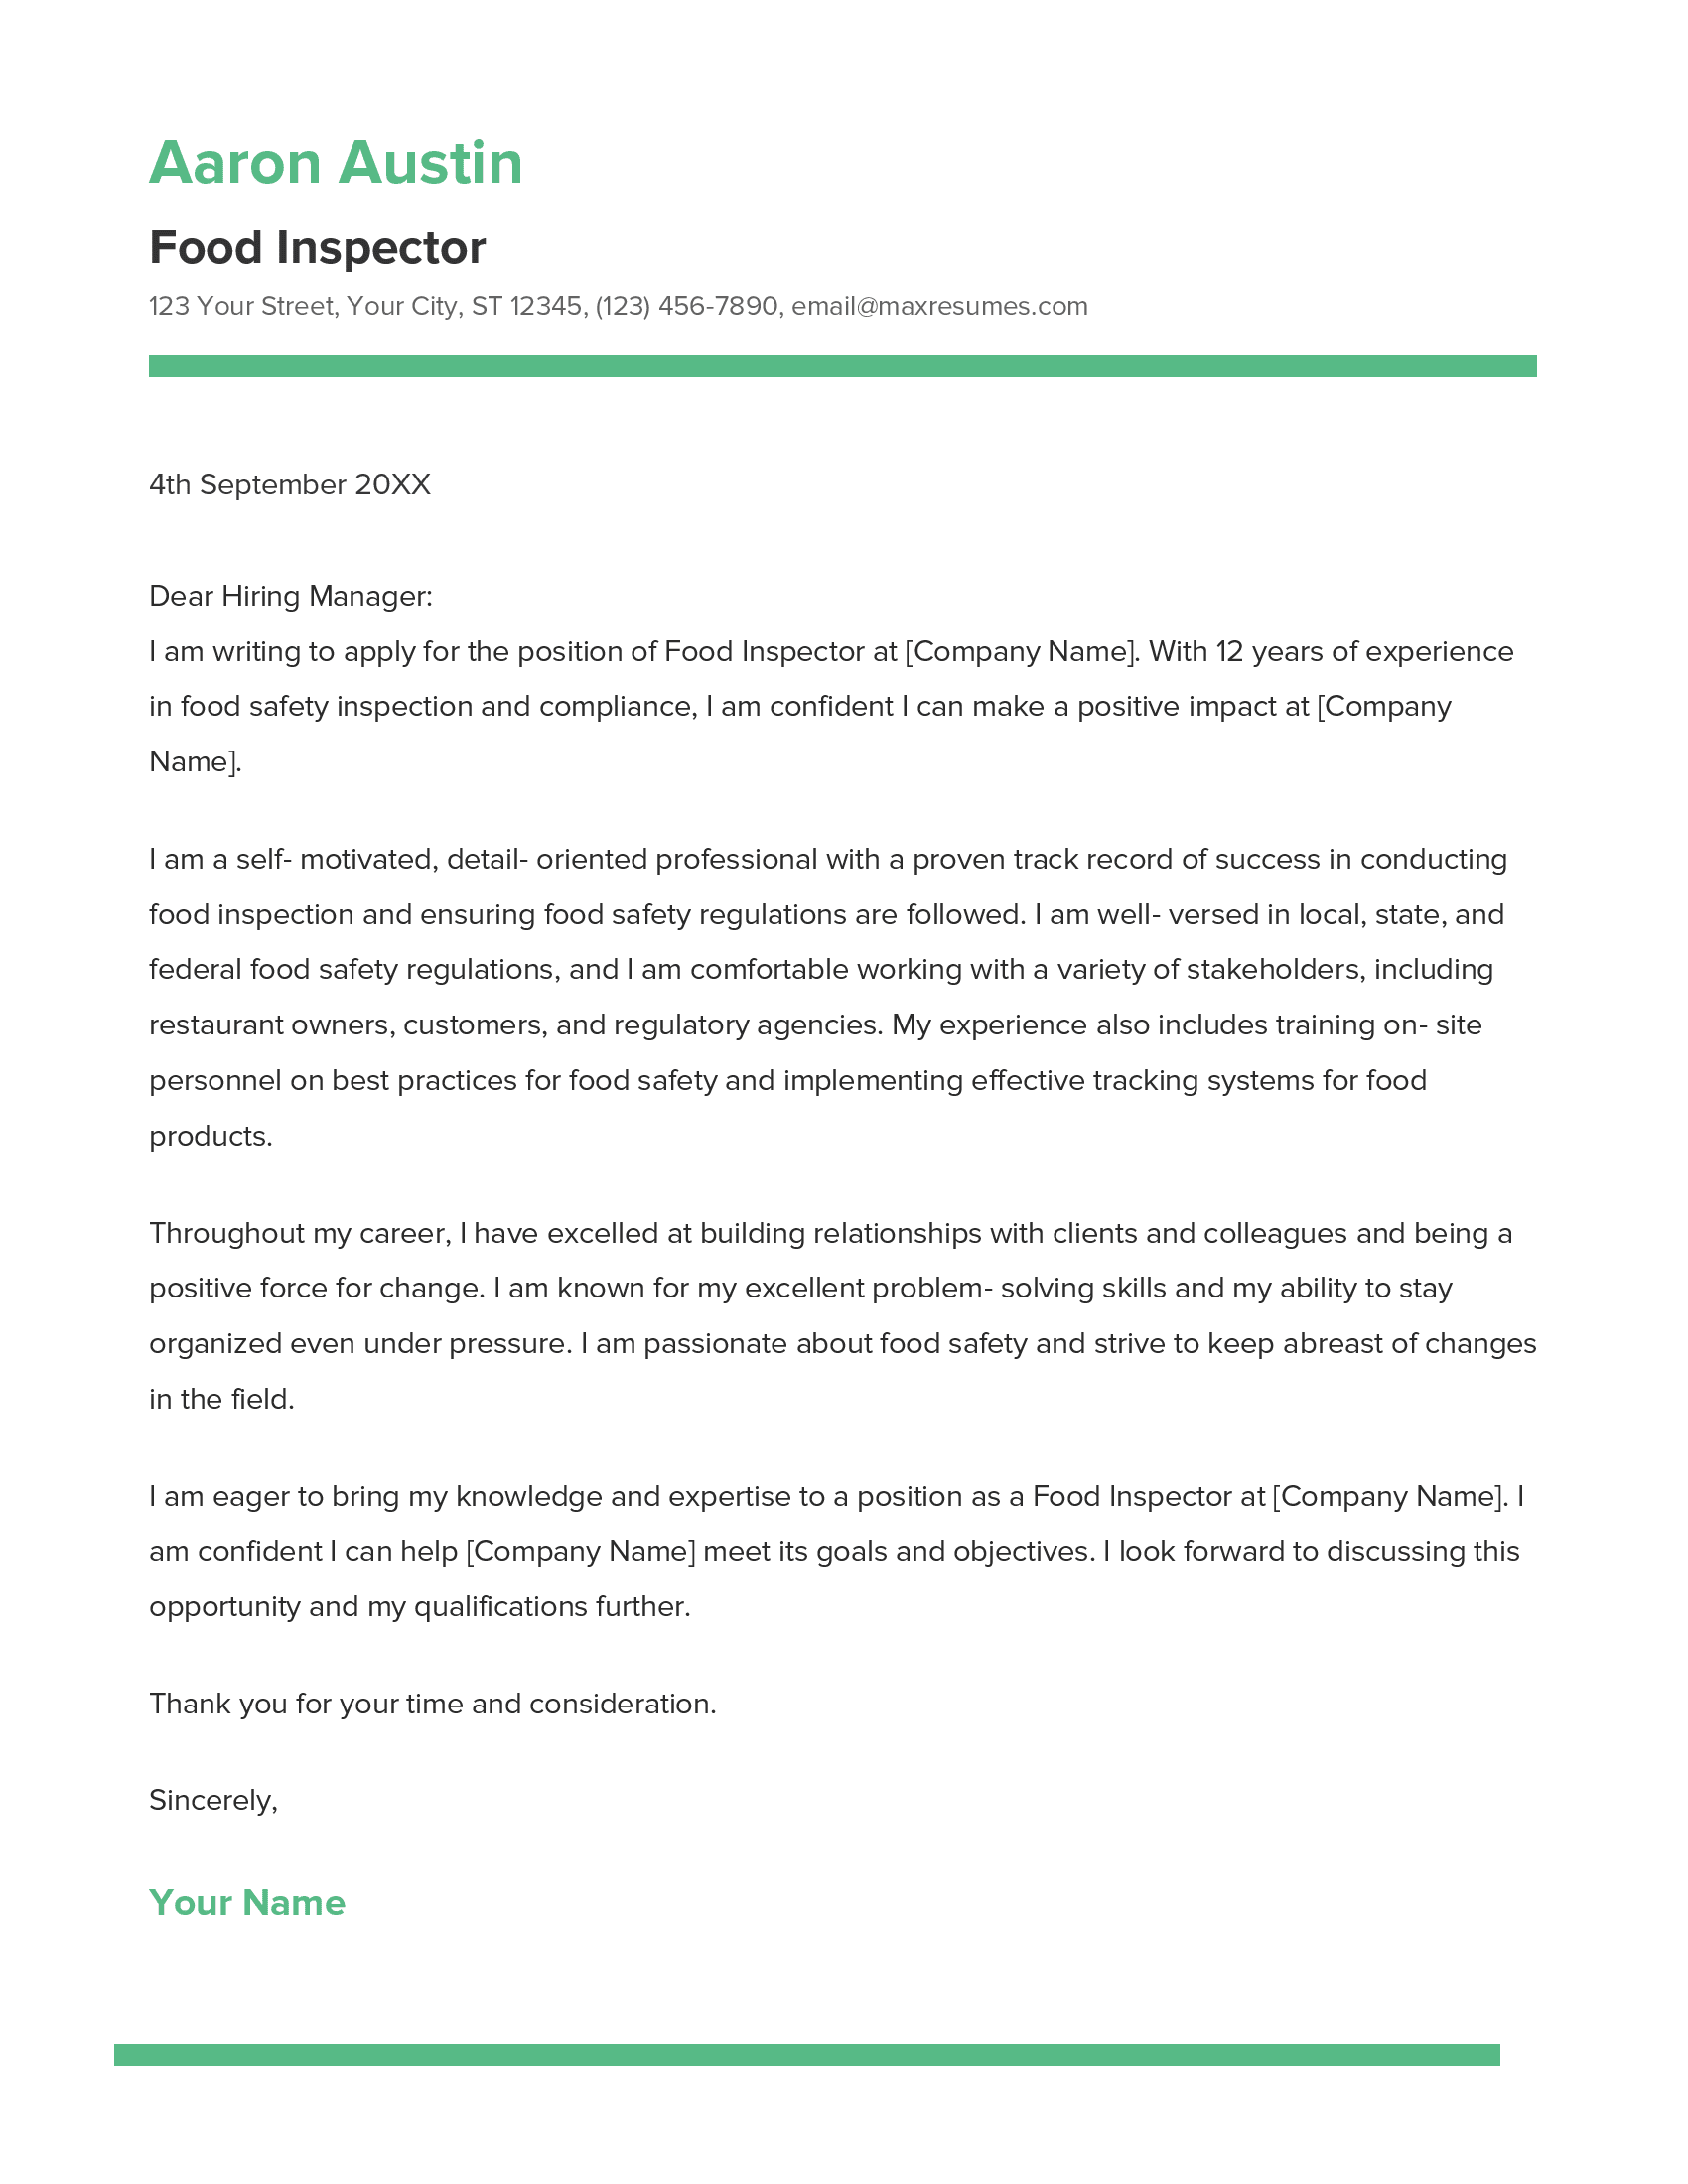 Food Inspector Cover Letter Example